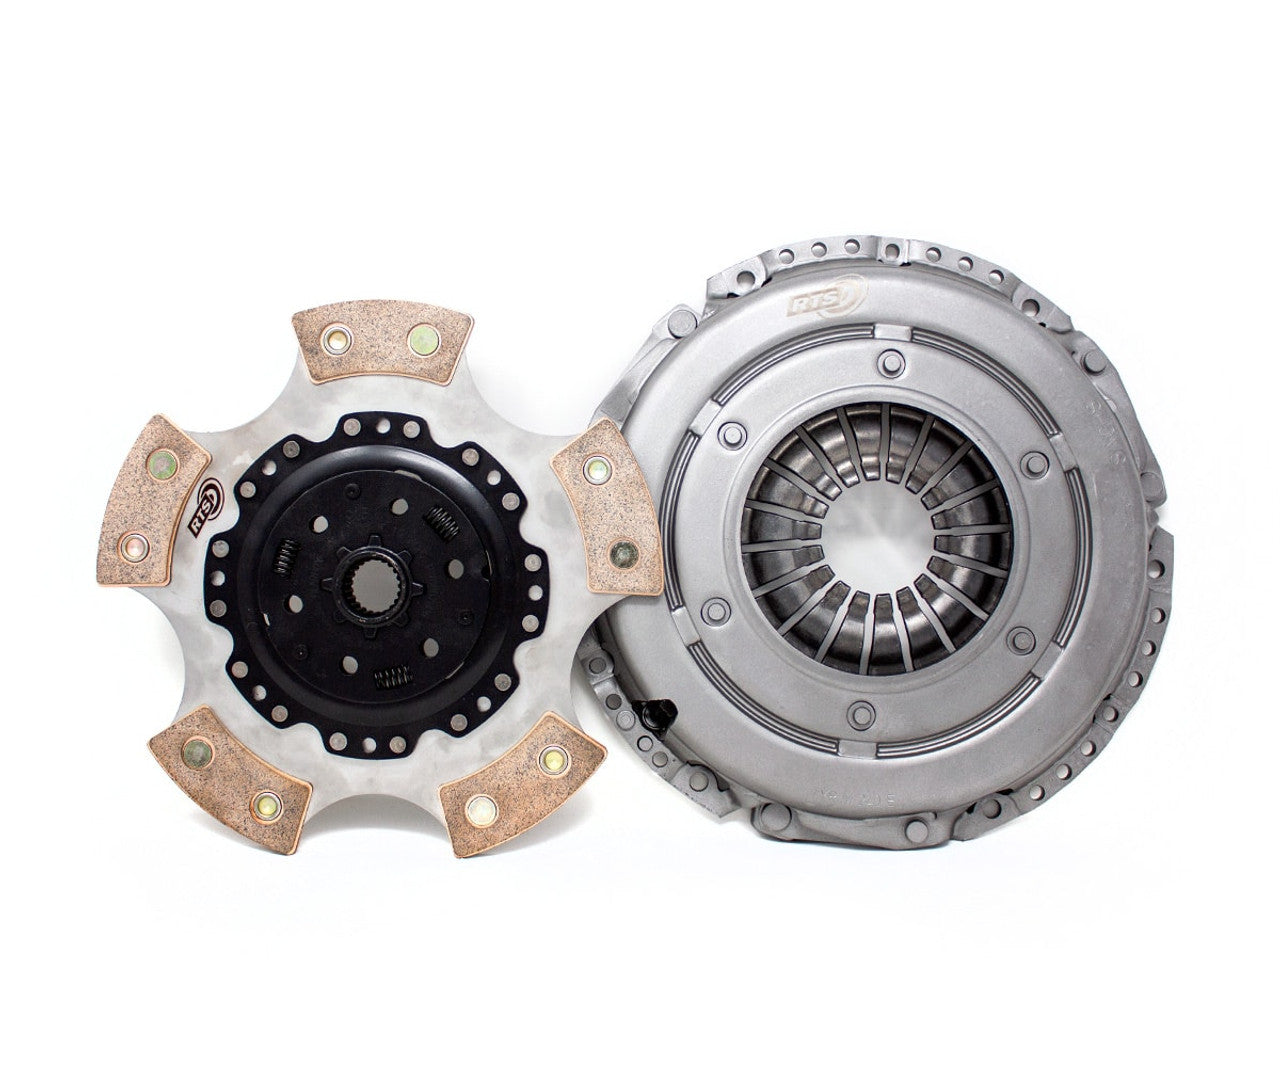 RTS Performance SMF Clutch - Paddle Clutch Kit PQ35 2.0TDI with Solid Flywheel